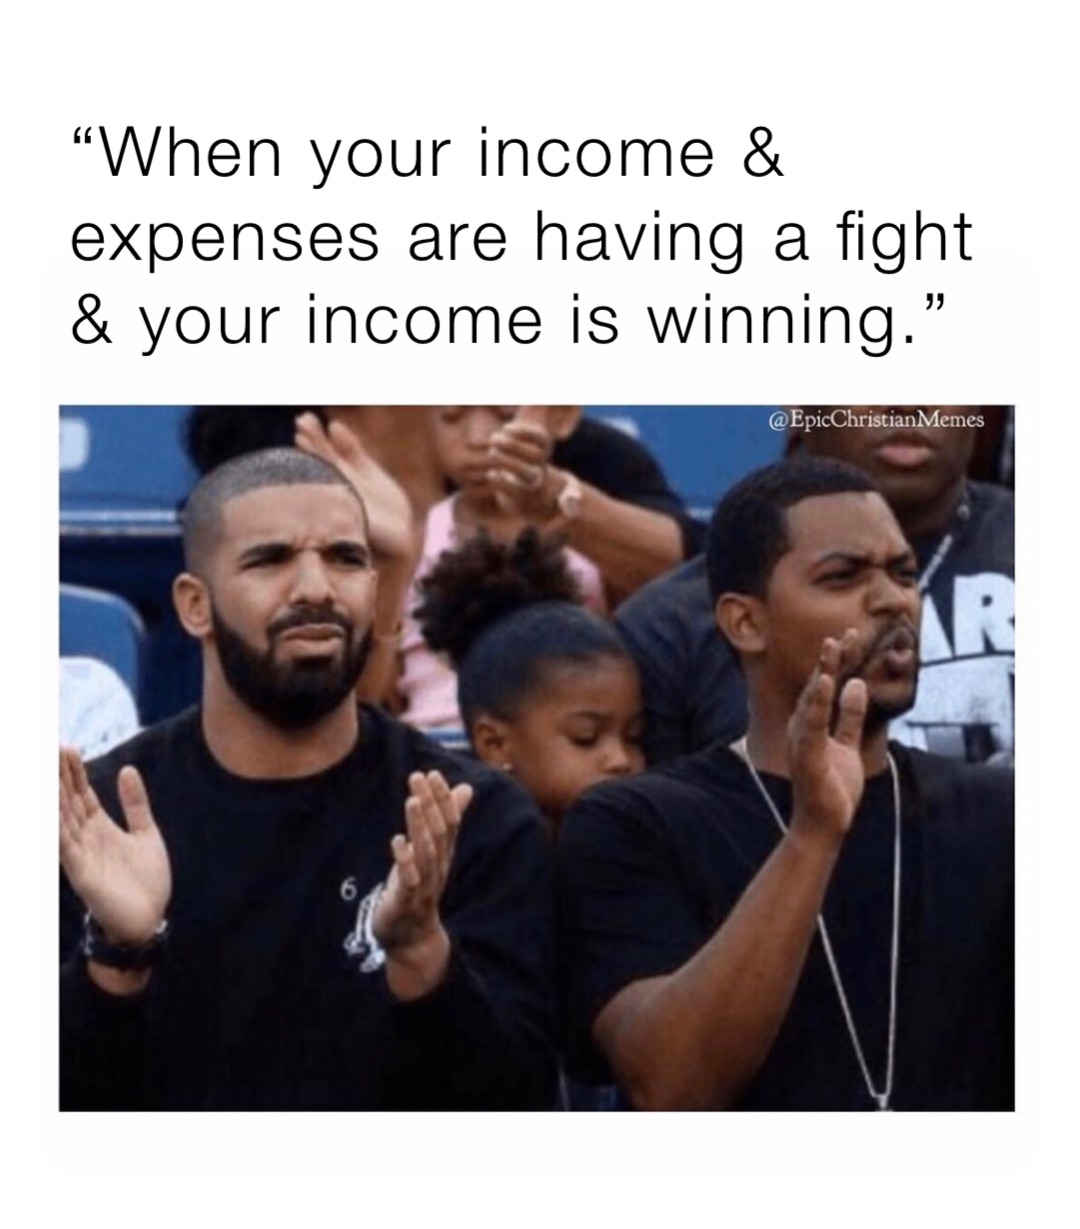 “When your income & expenses are having a fight & your income is winning.”